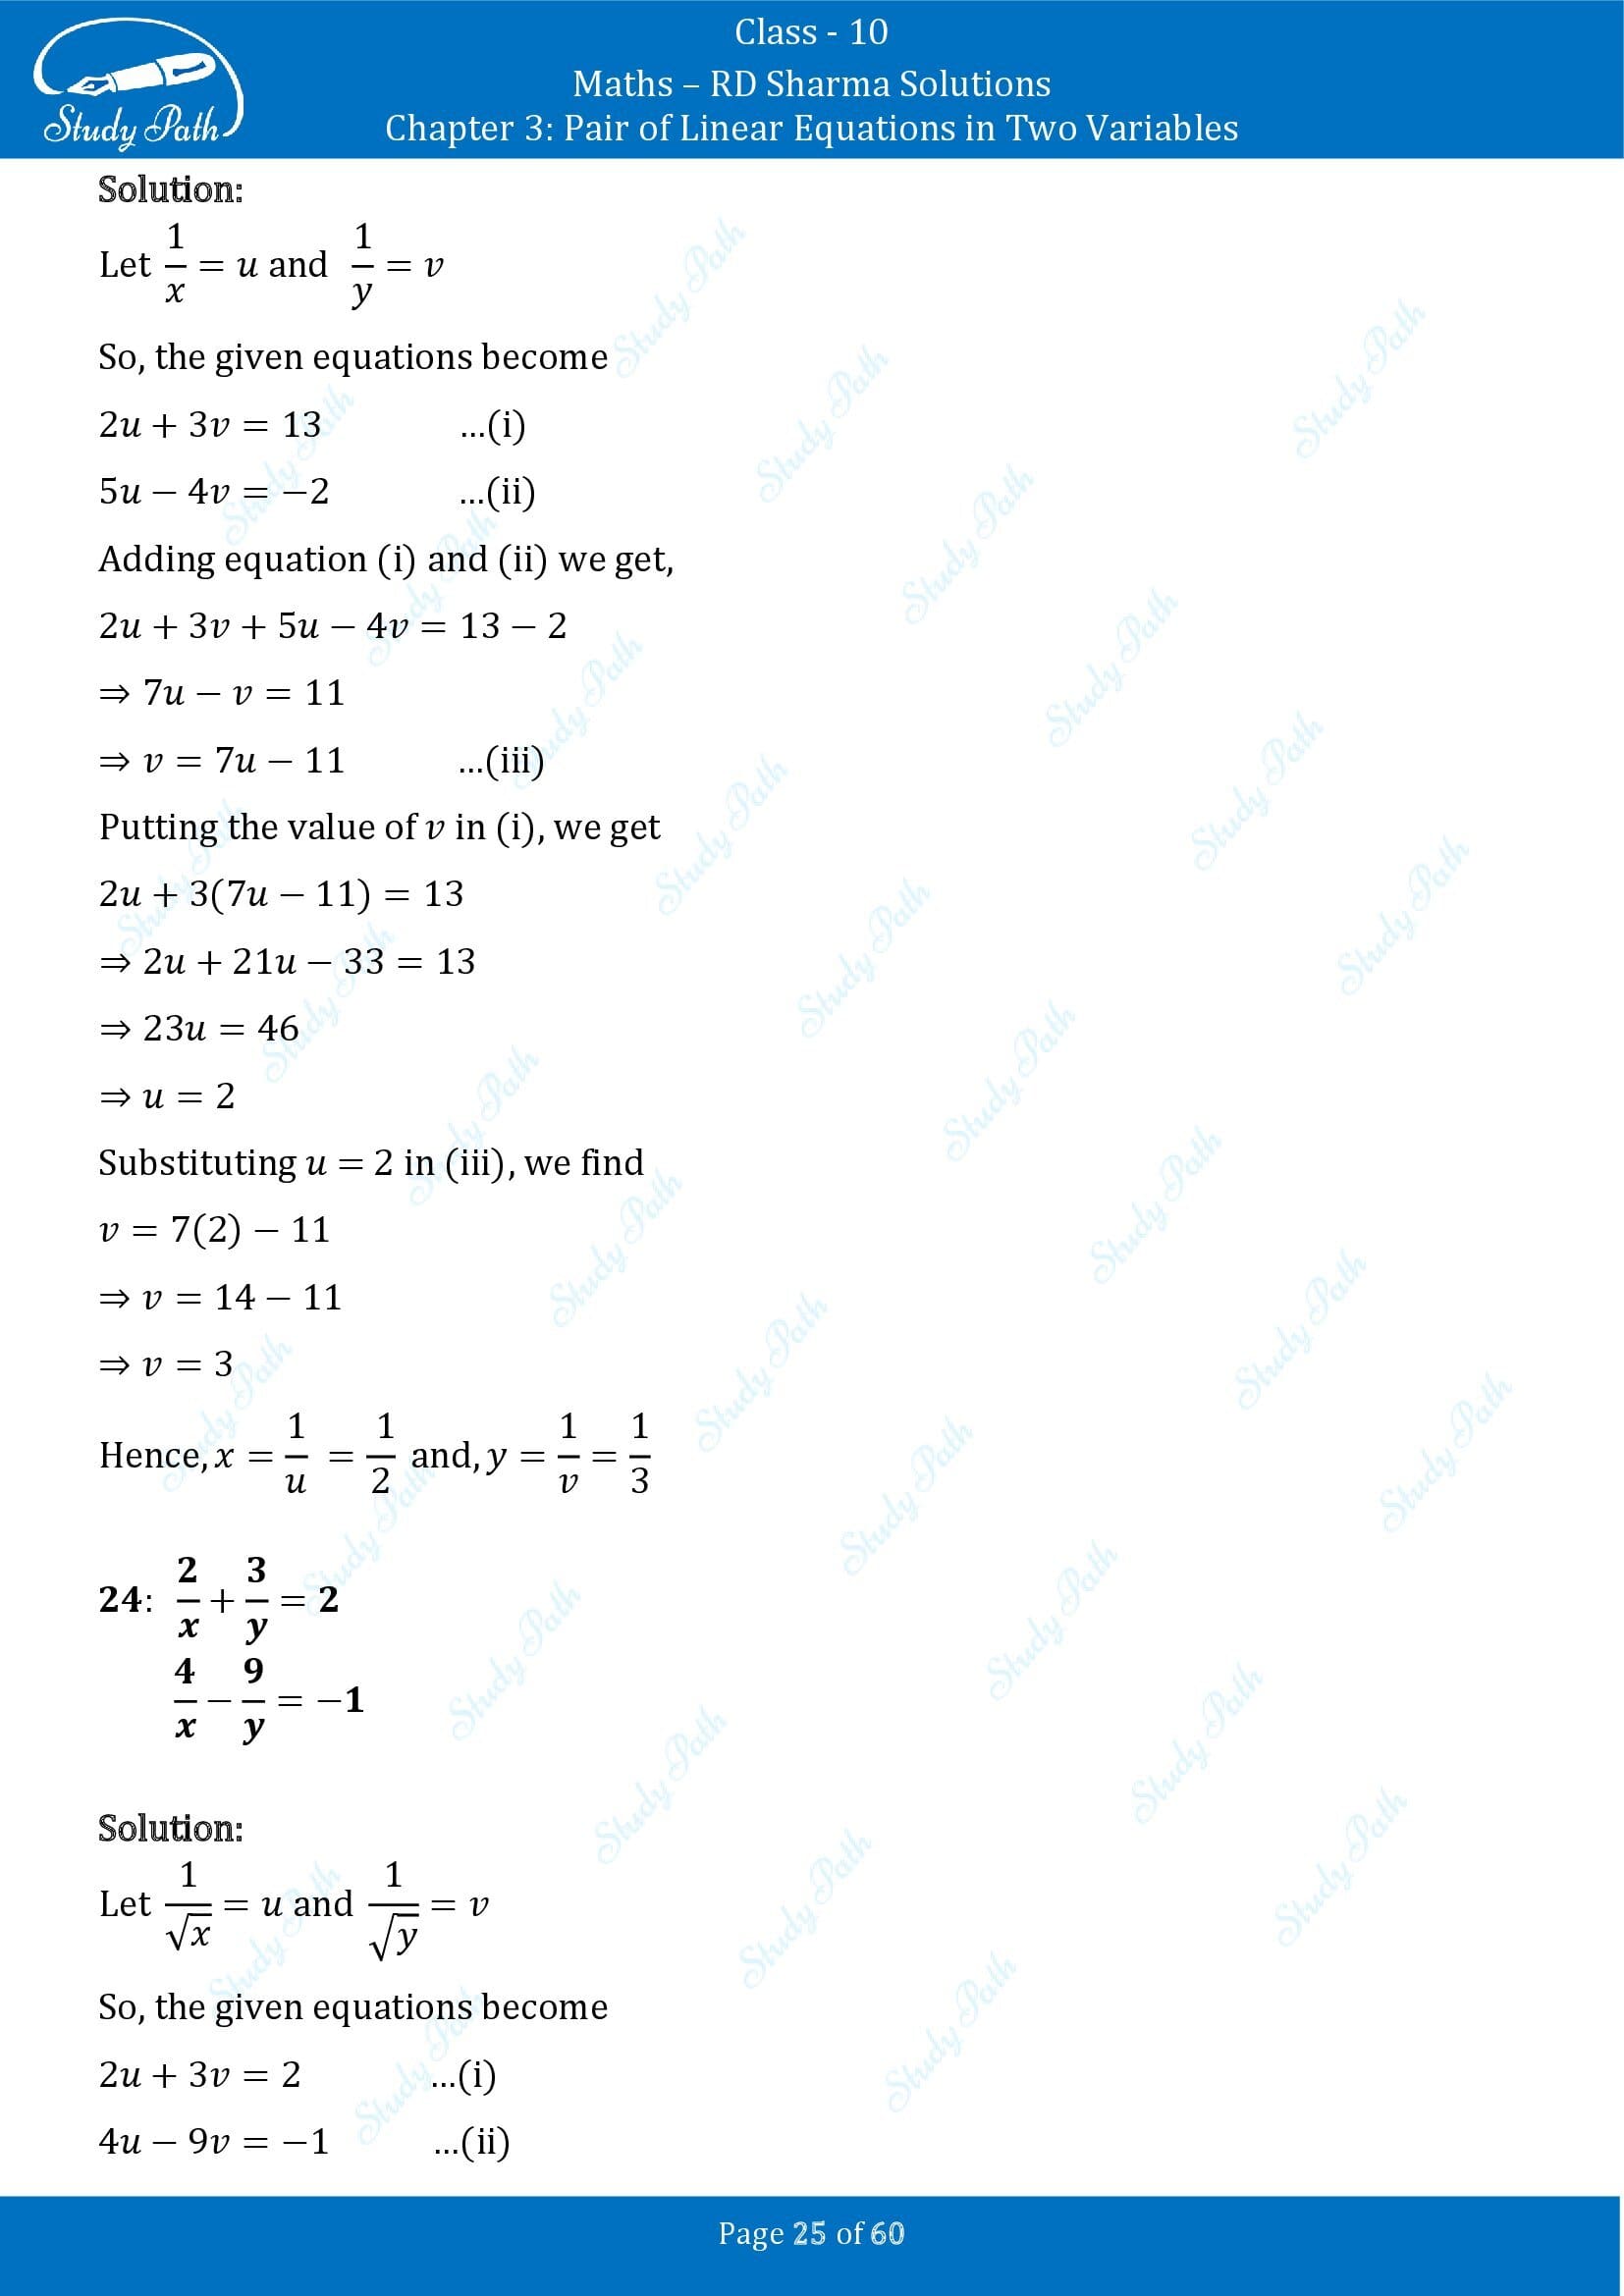 RD Sharma Solutions Class 10 Chapter 3 Pair of Linear Equations in Two Variables Exercise 3.3 00025